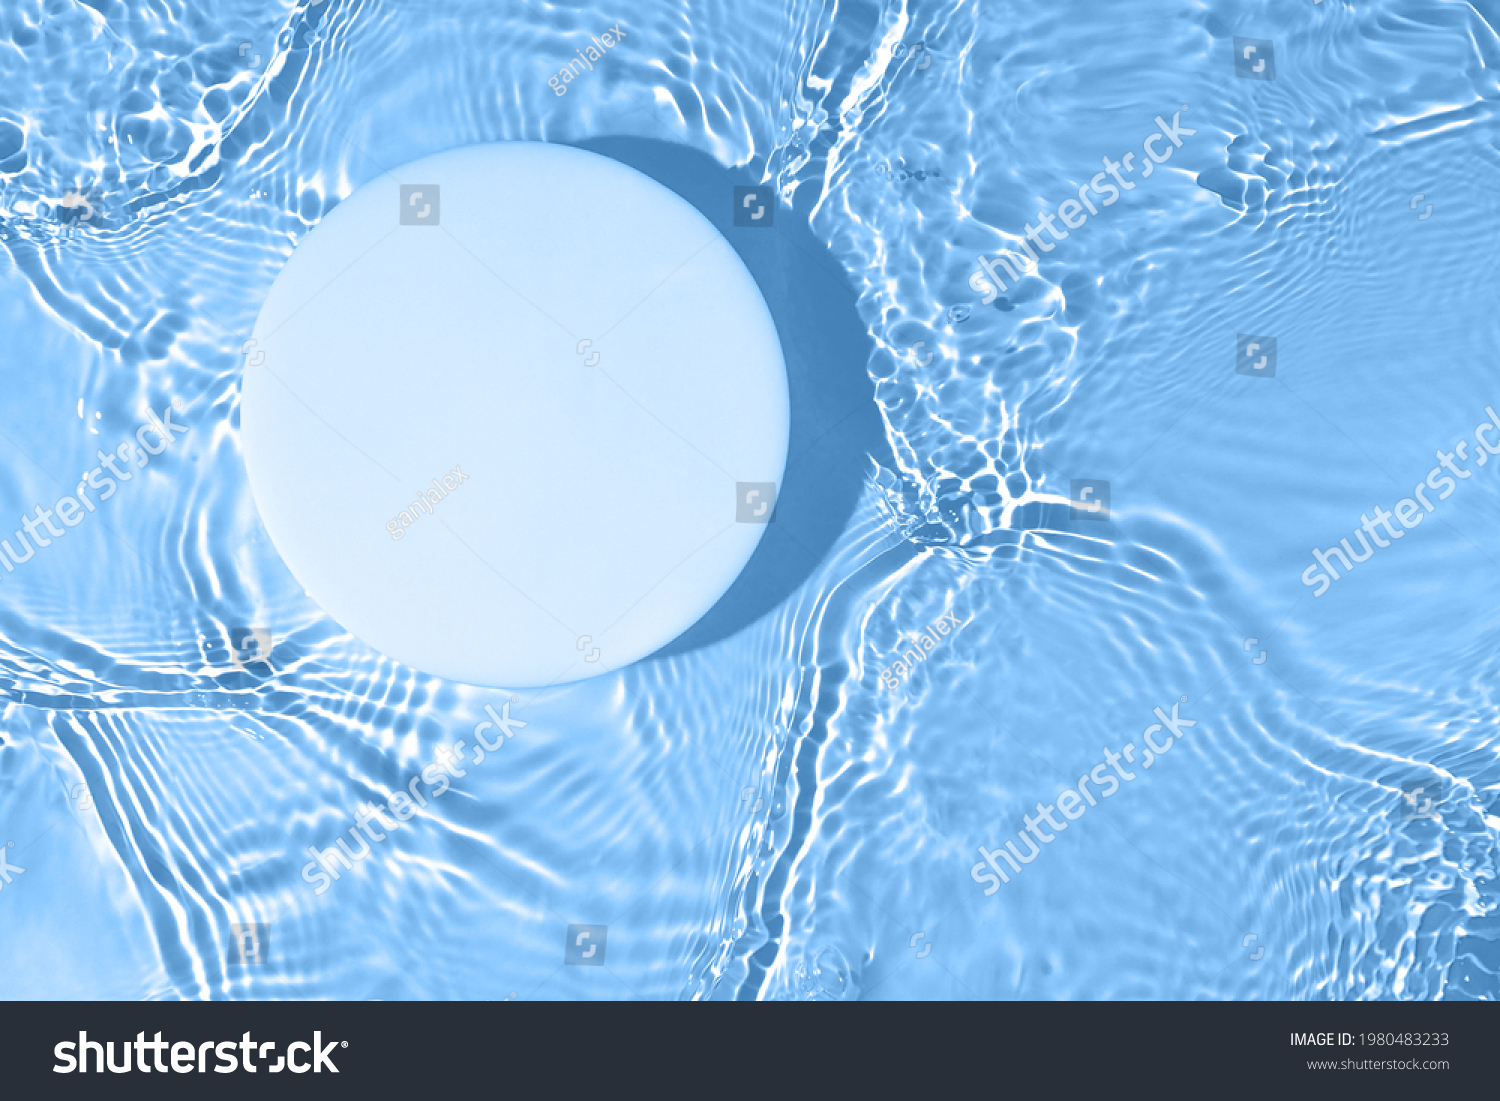 Empty white circle podium on transparent clear calm blue water texture with splashes and waves in sunlight. Abstract nature background for product presentation. Flat lay cosmetic mockup, copy space. #1980483233